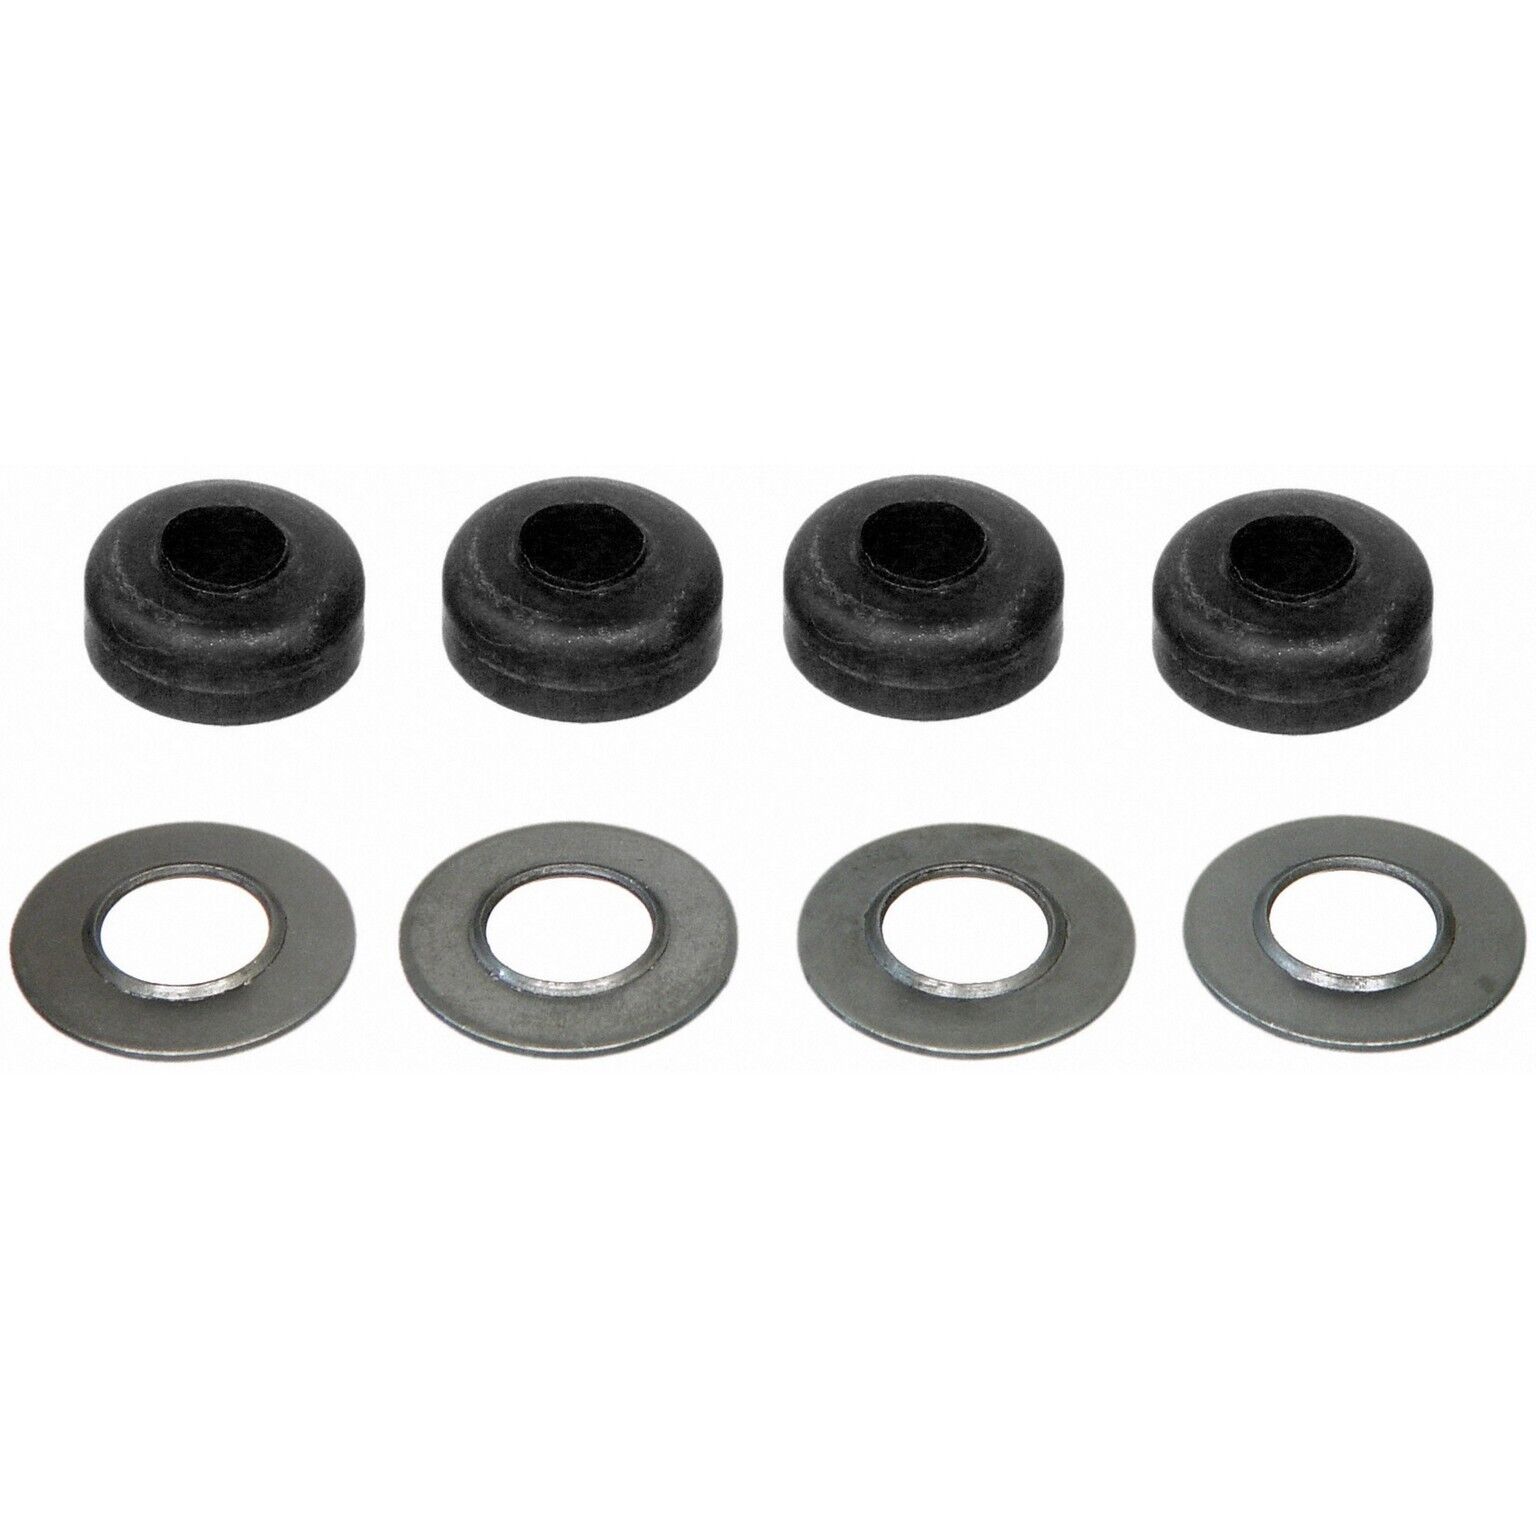 For Chevy Bel Air Biscayne Front Suspension Control Arm Bushing Kit Moog K6079A